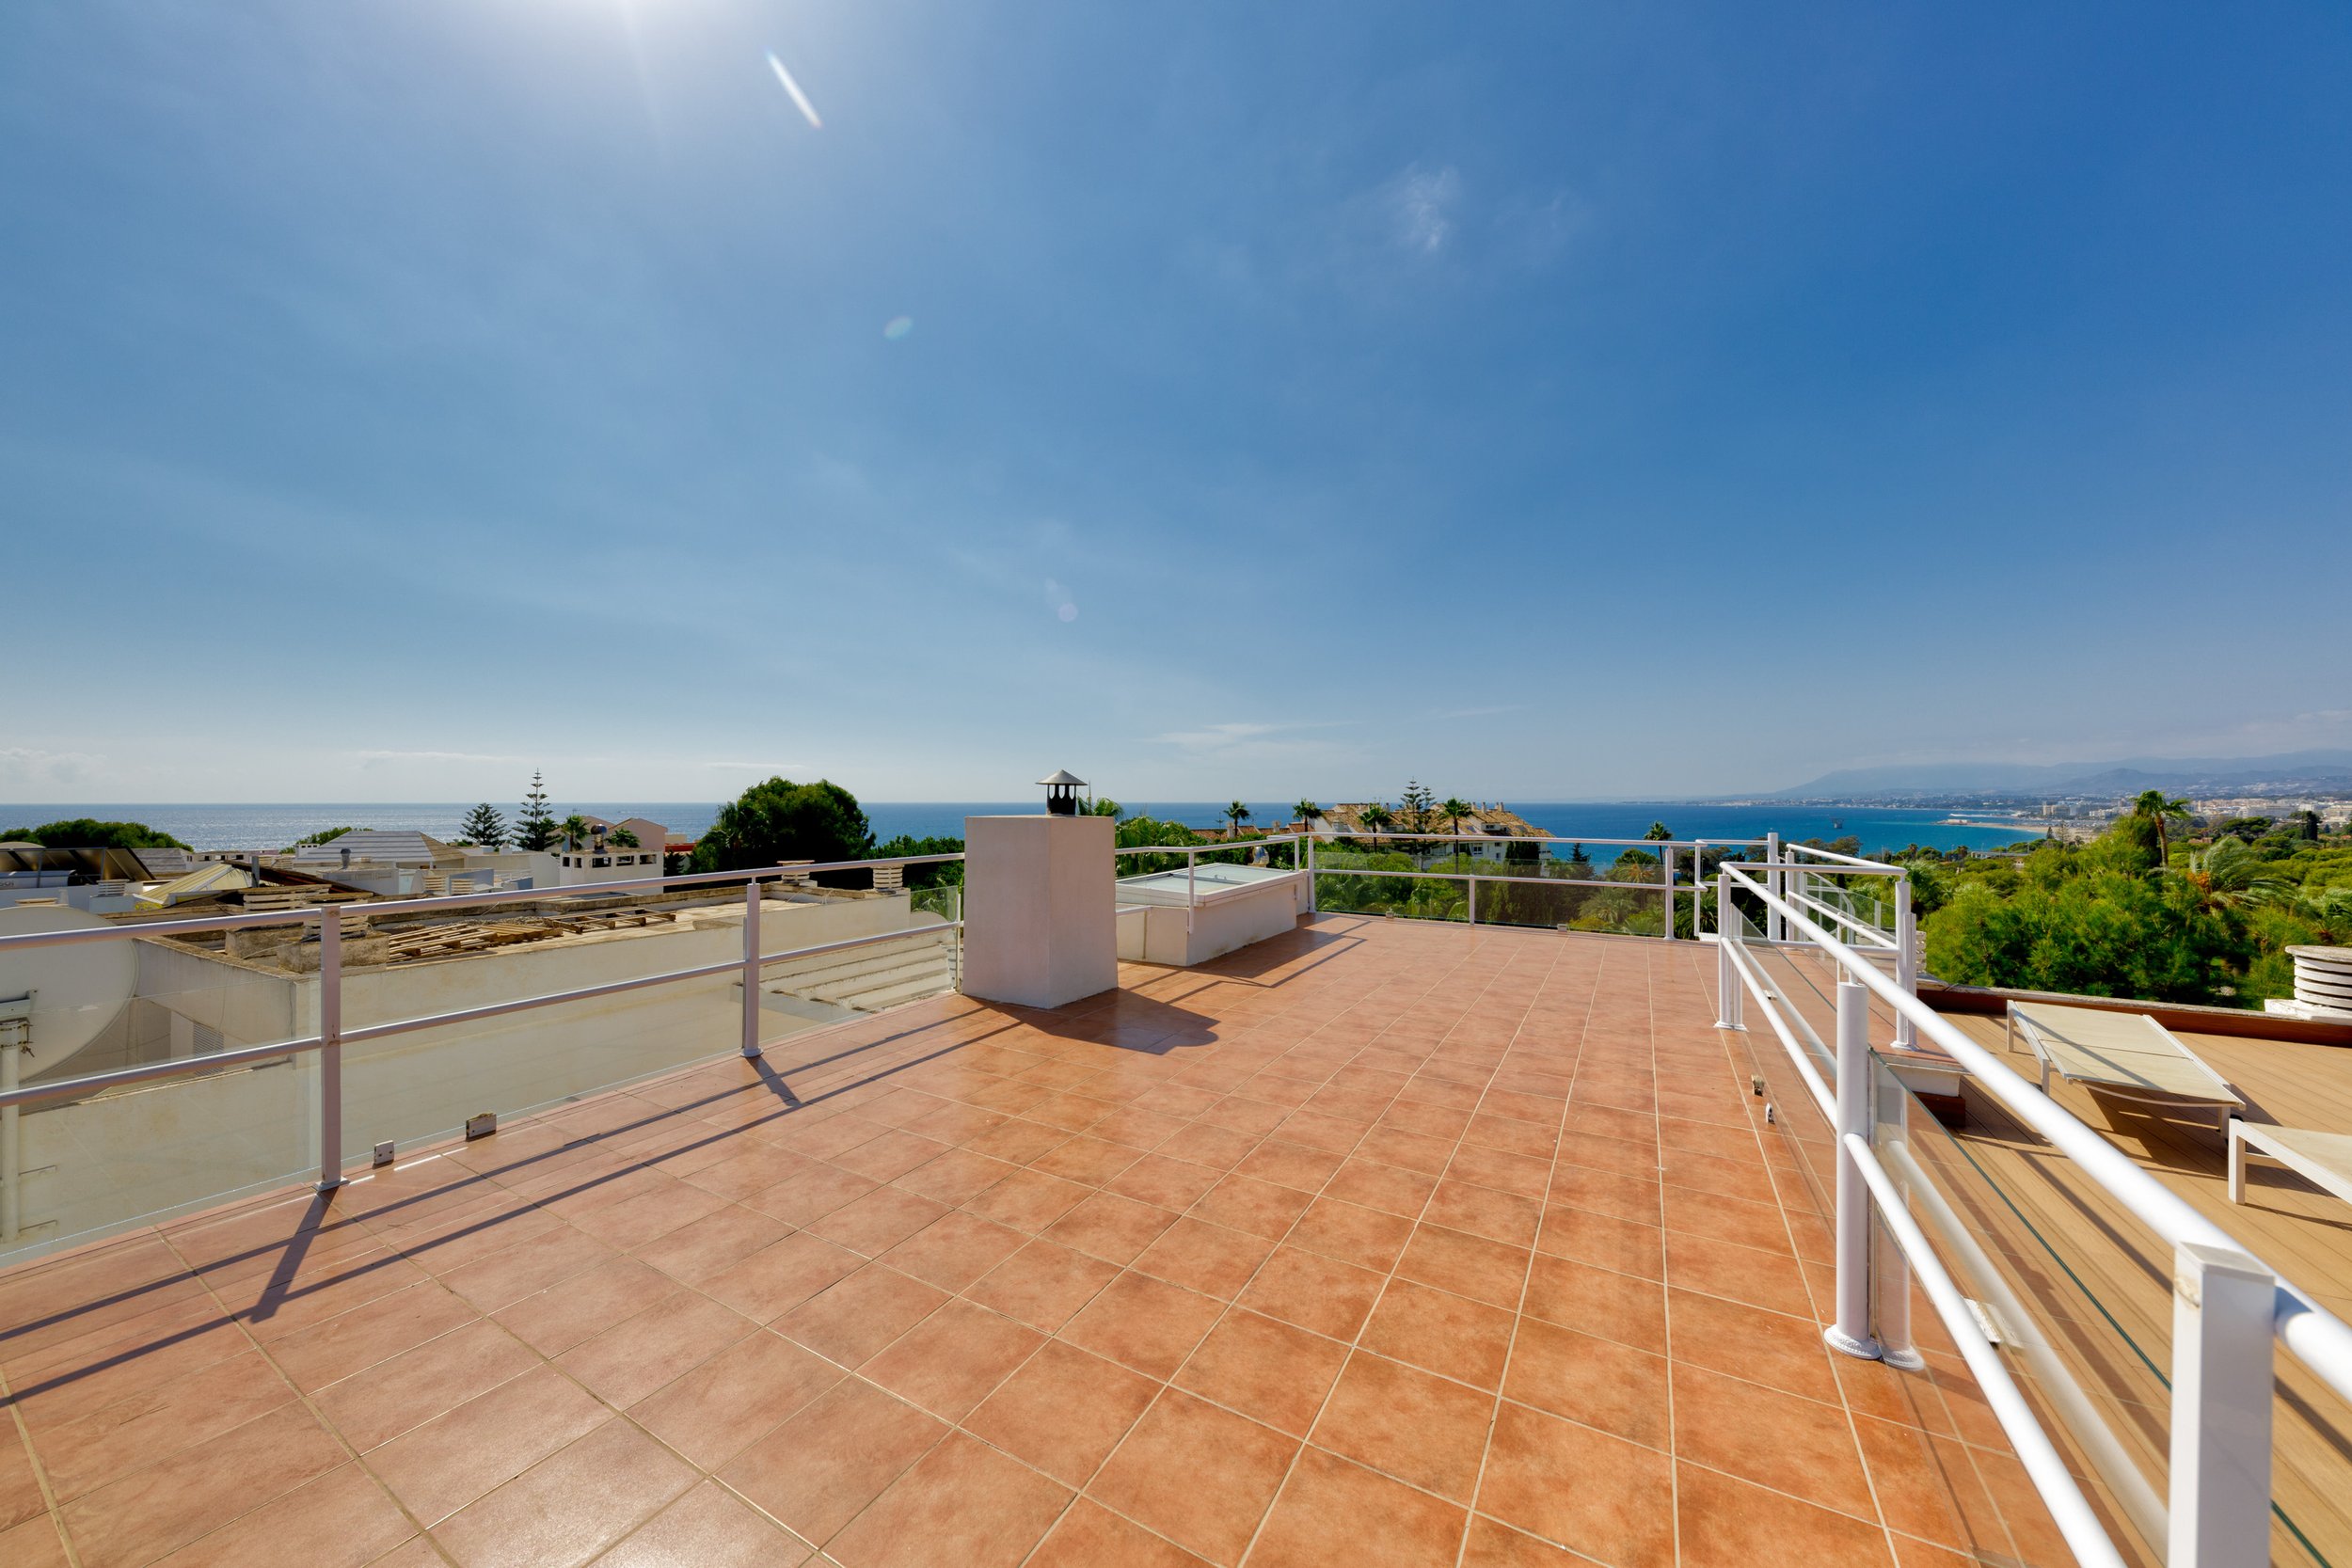 for-sale-renovated-three-bedroom-duplex-penthouse-rio-real-marbella-fs8795-4.jpg